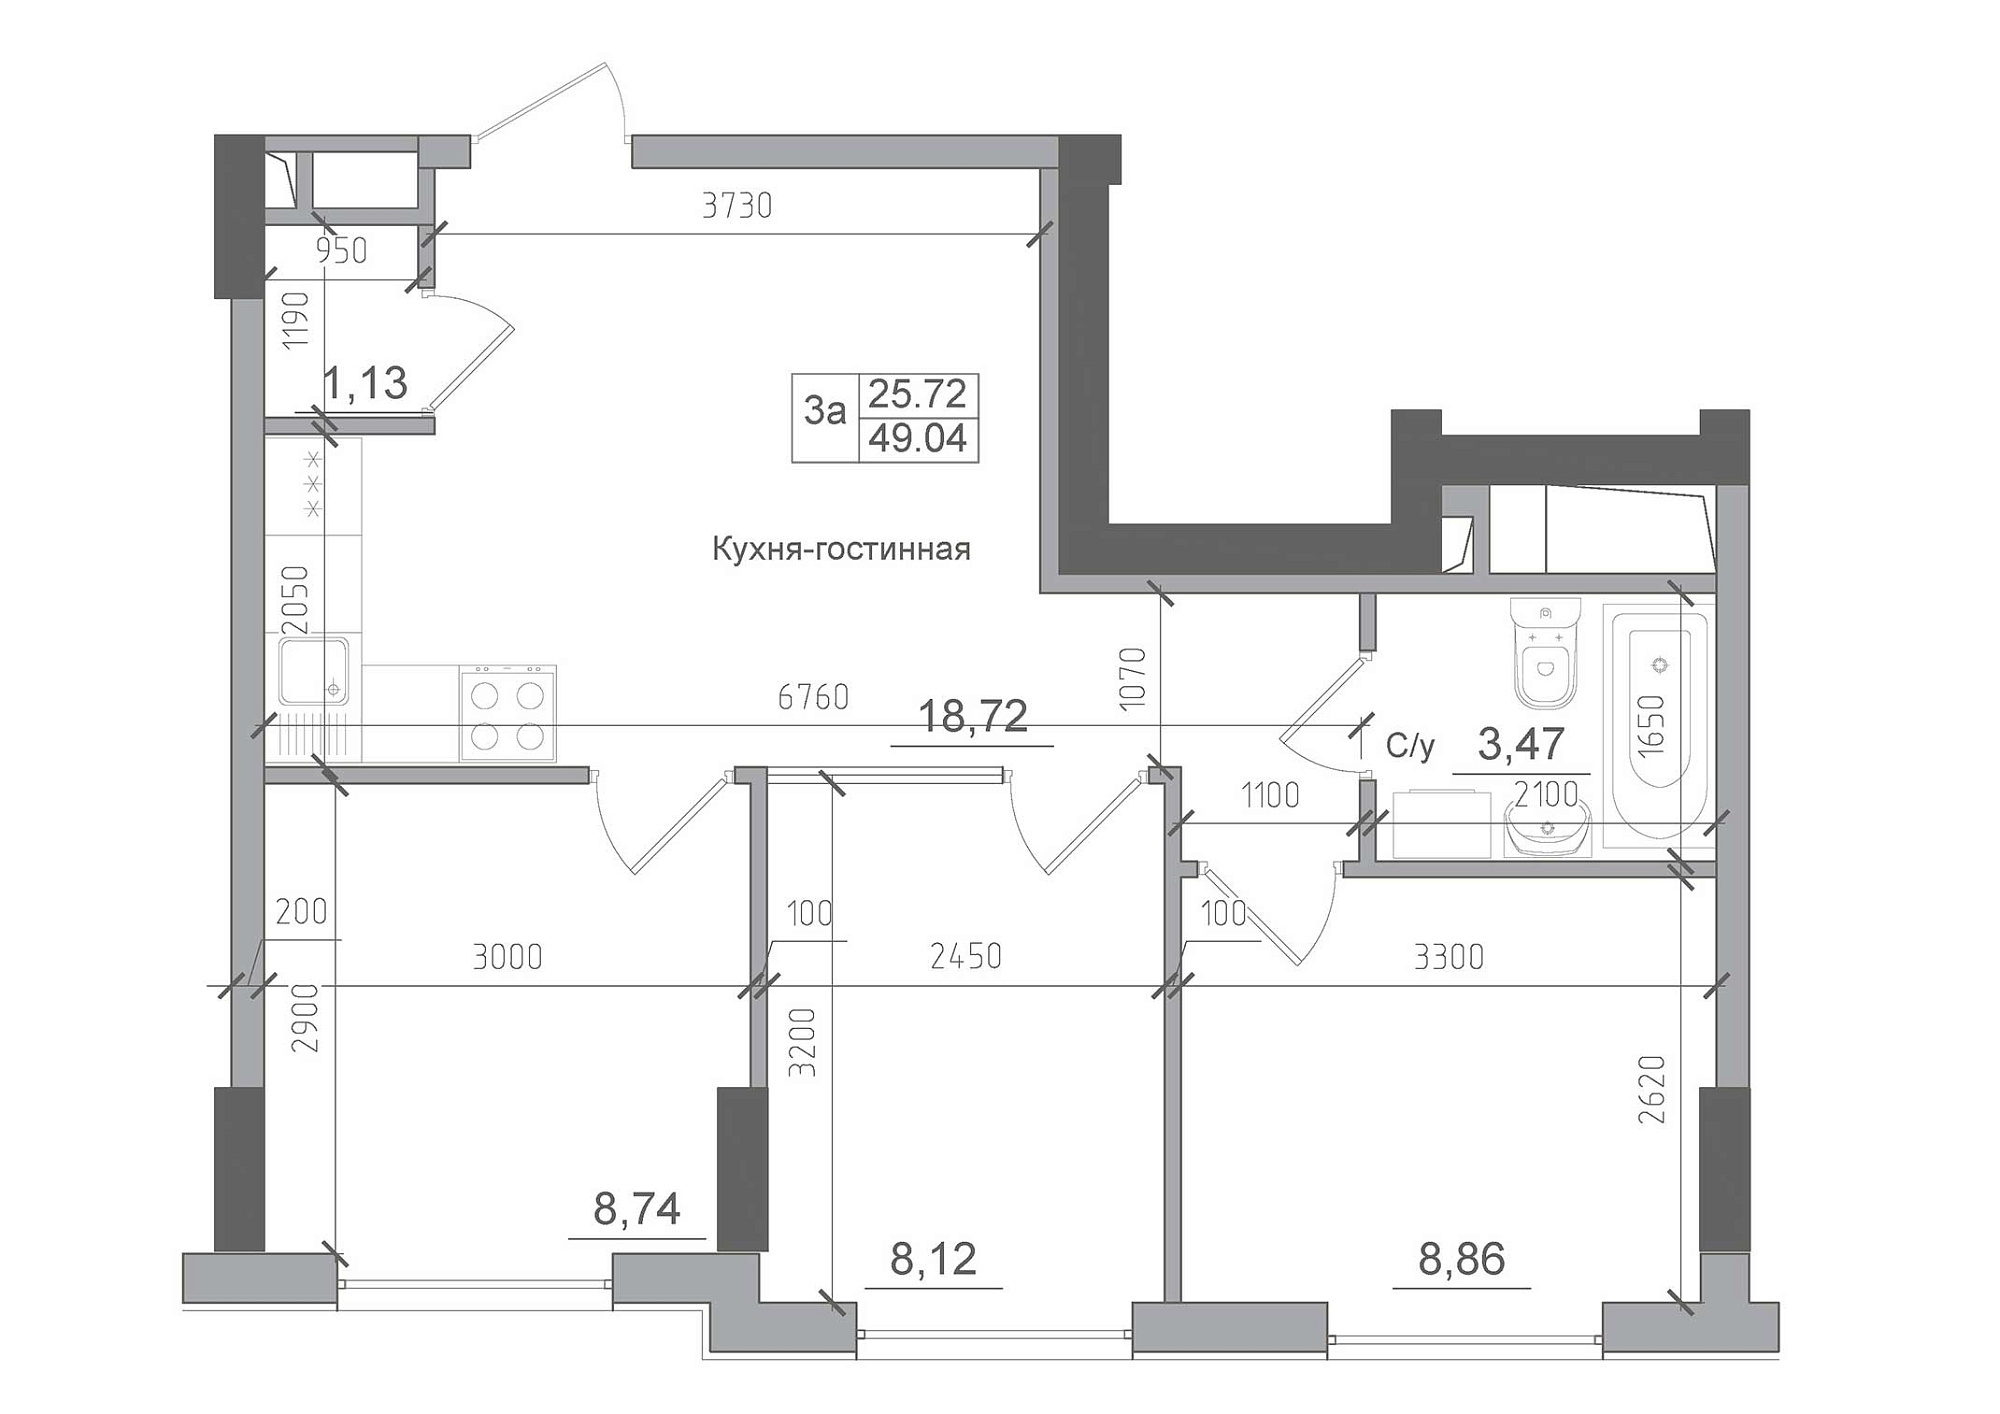 Planning 3-rm flats area 49.04m2, AB-22-06/00007.